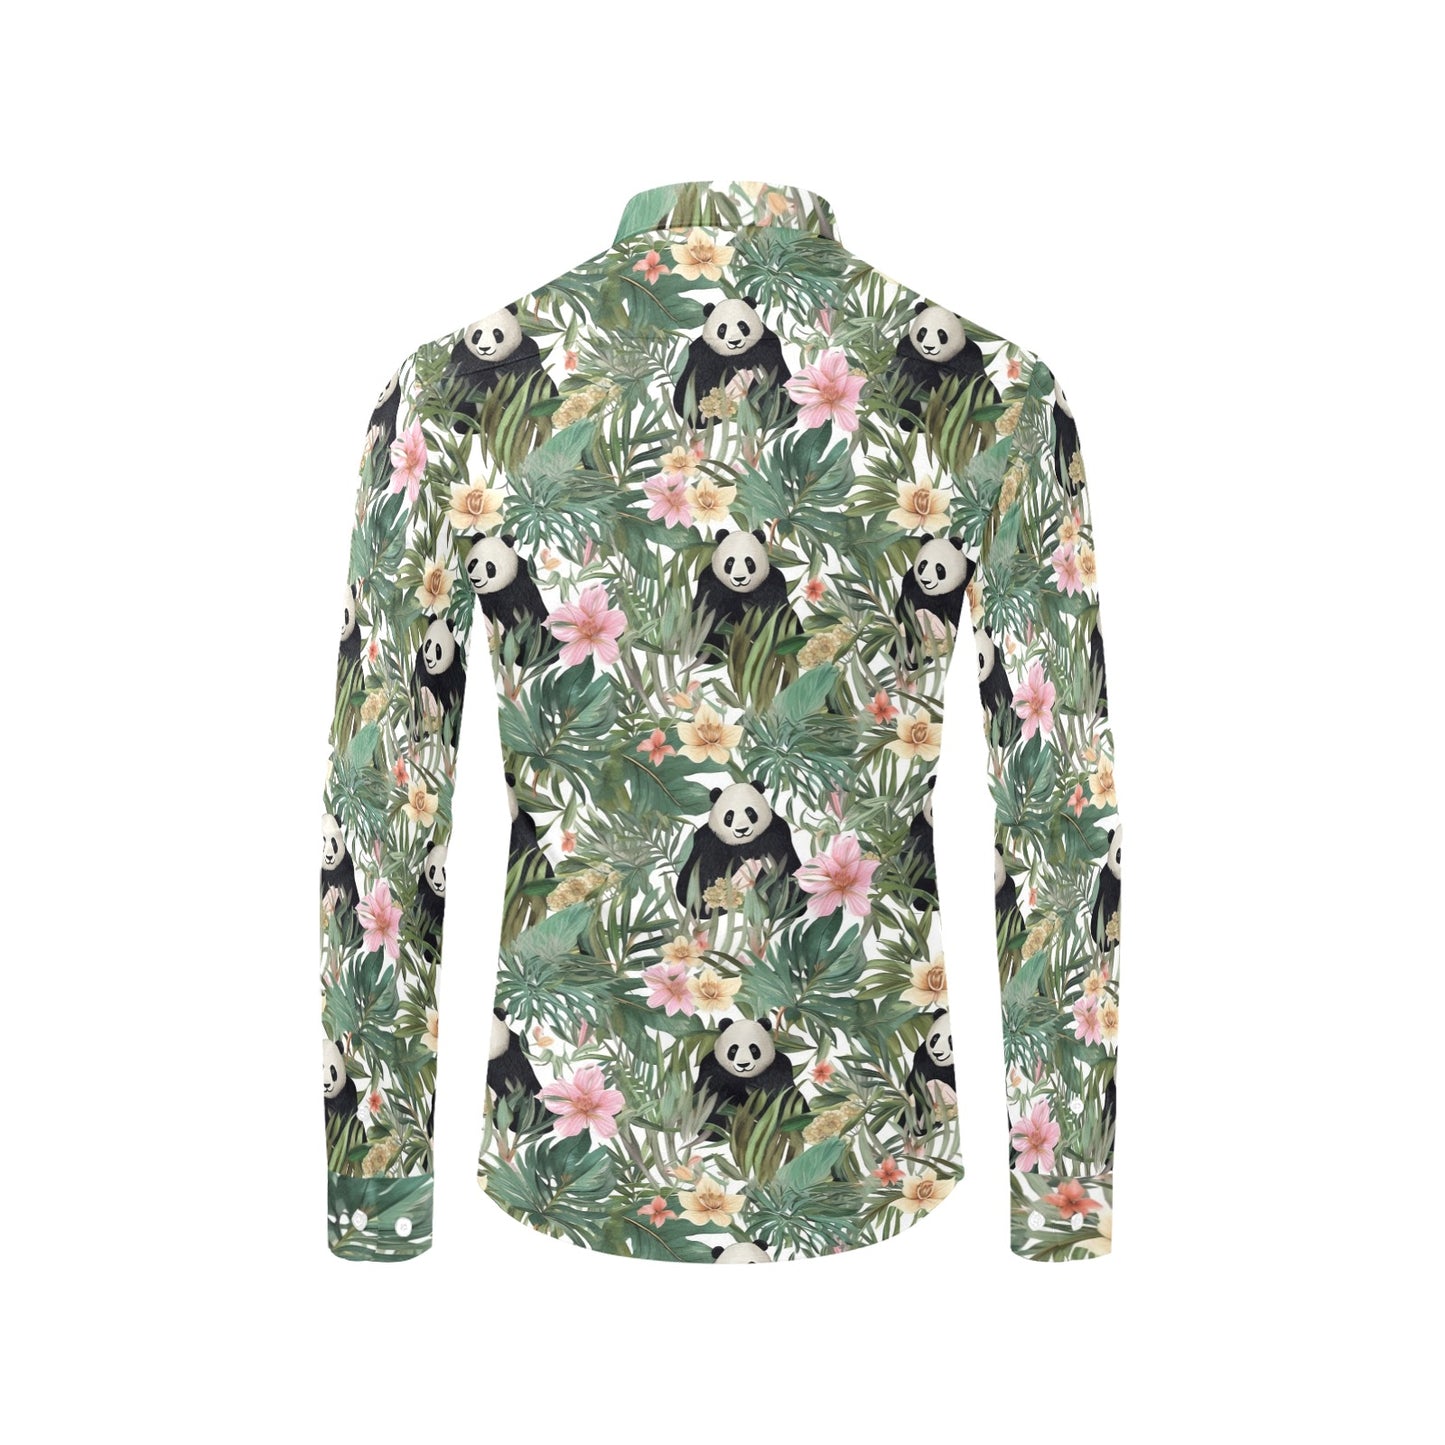 Panda Tropical Leaves Long Sleeve Men Button Up Shirt, Green Floral Summer Print Dress Buttoned Collar Casual Dress Shirt with Chest Pocket Starcove Fashion